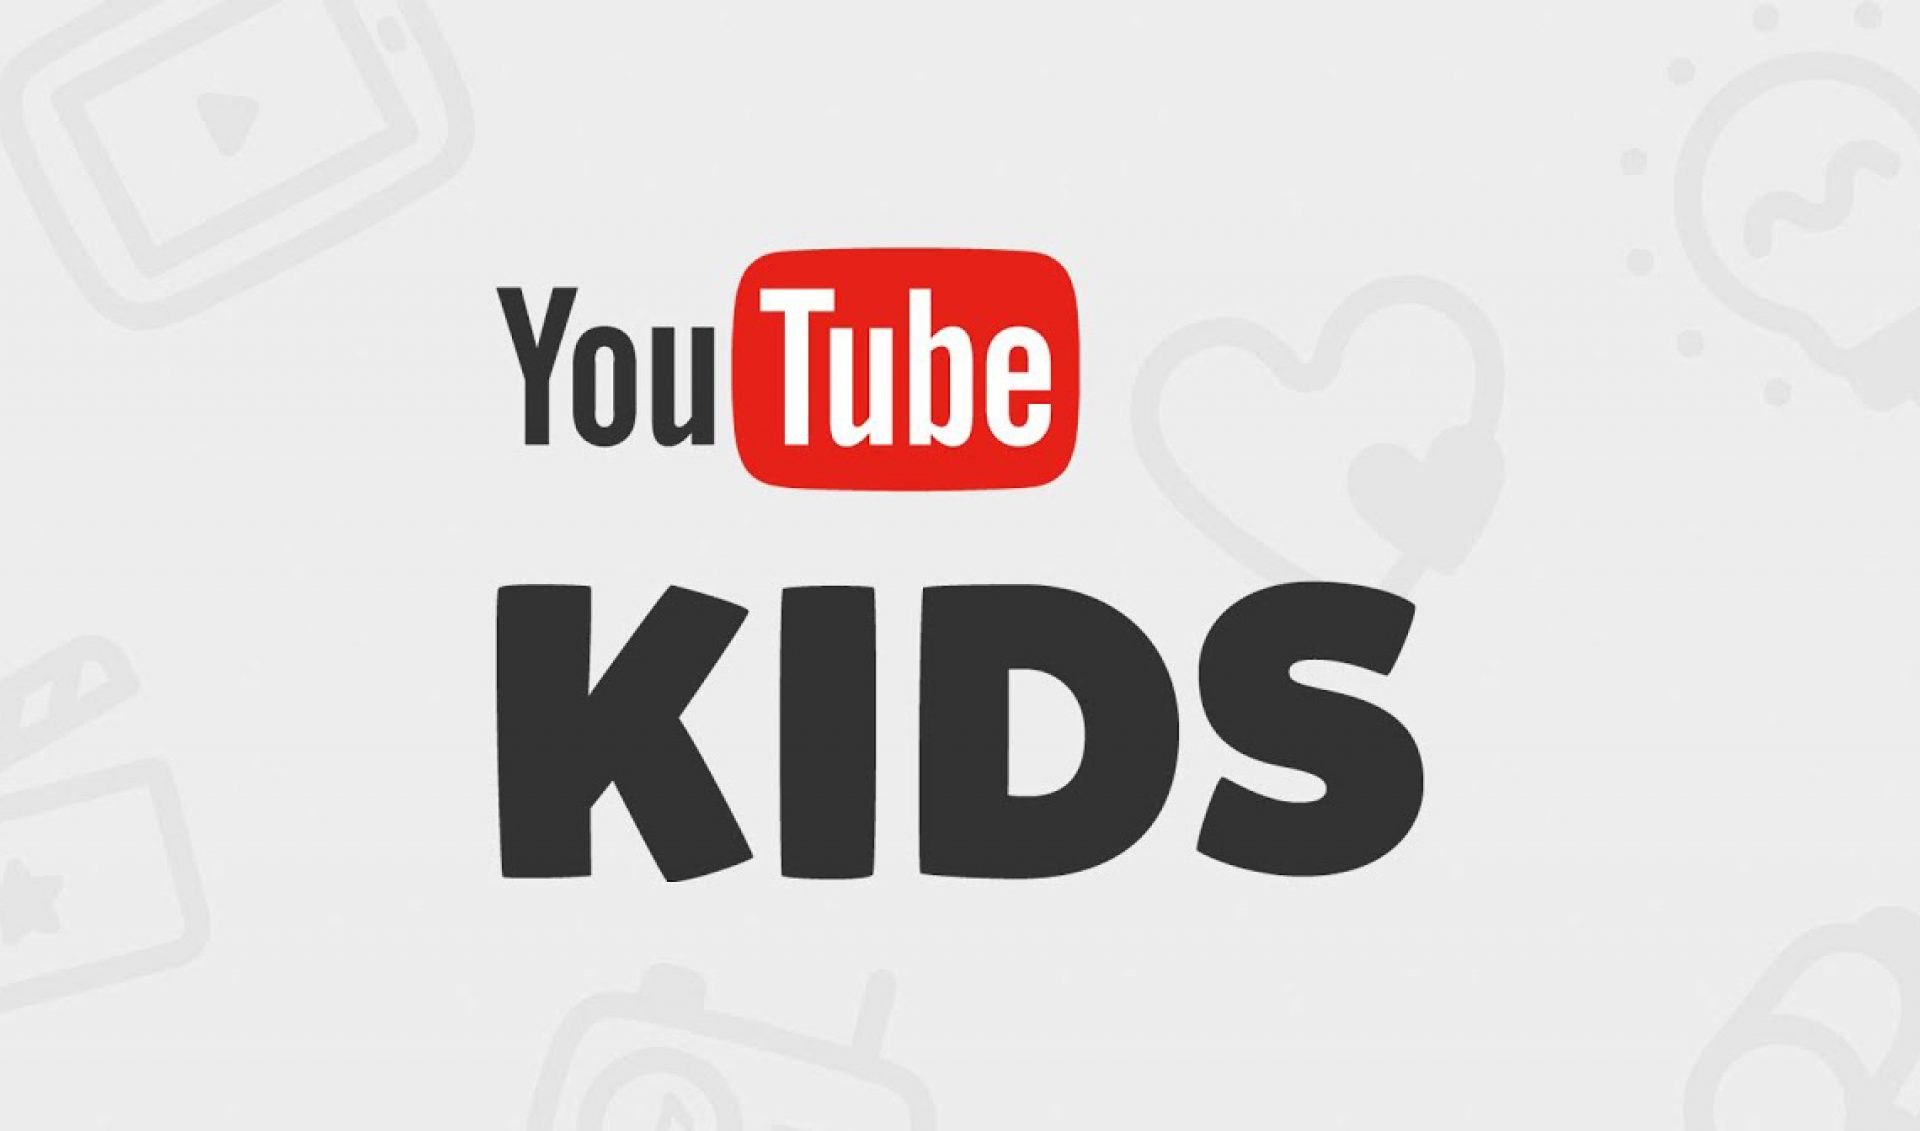 Top 10 best history channels on YouTube for kids in 2022